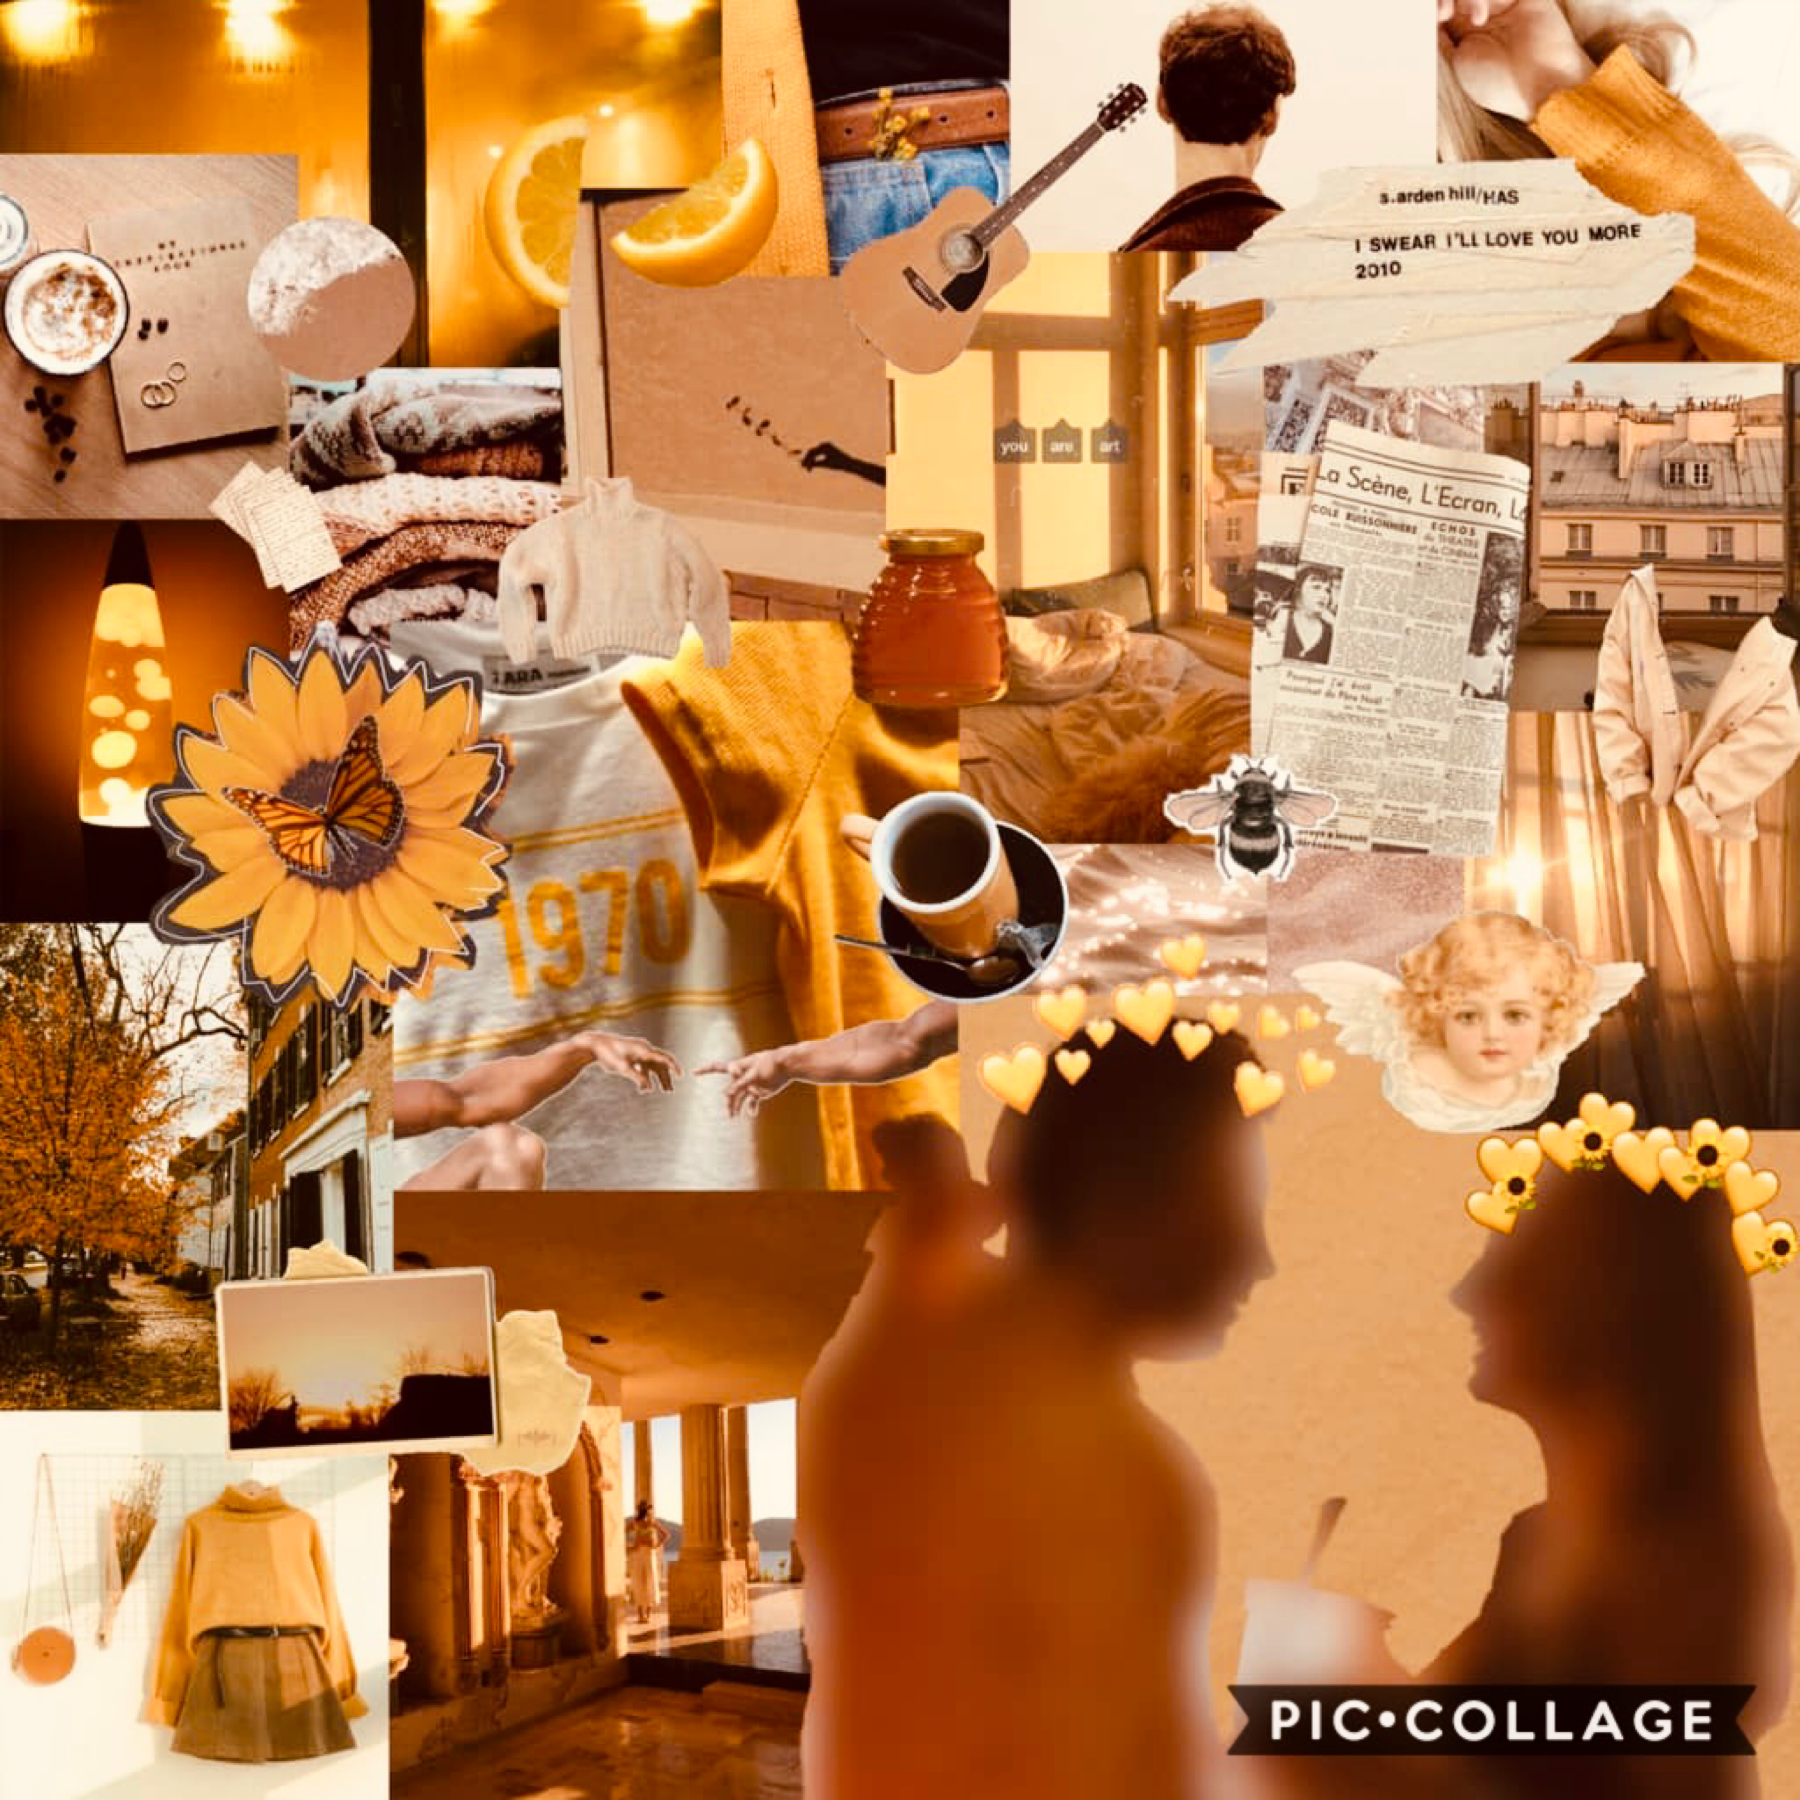 🍯🍁 tap 🍁🍯


i’m reposting this cuz i like this one :-) i don’t normally do square collages nowadays but eh whatever,, how has your day been so far?? :-)